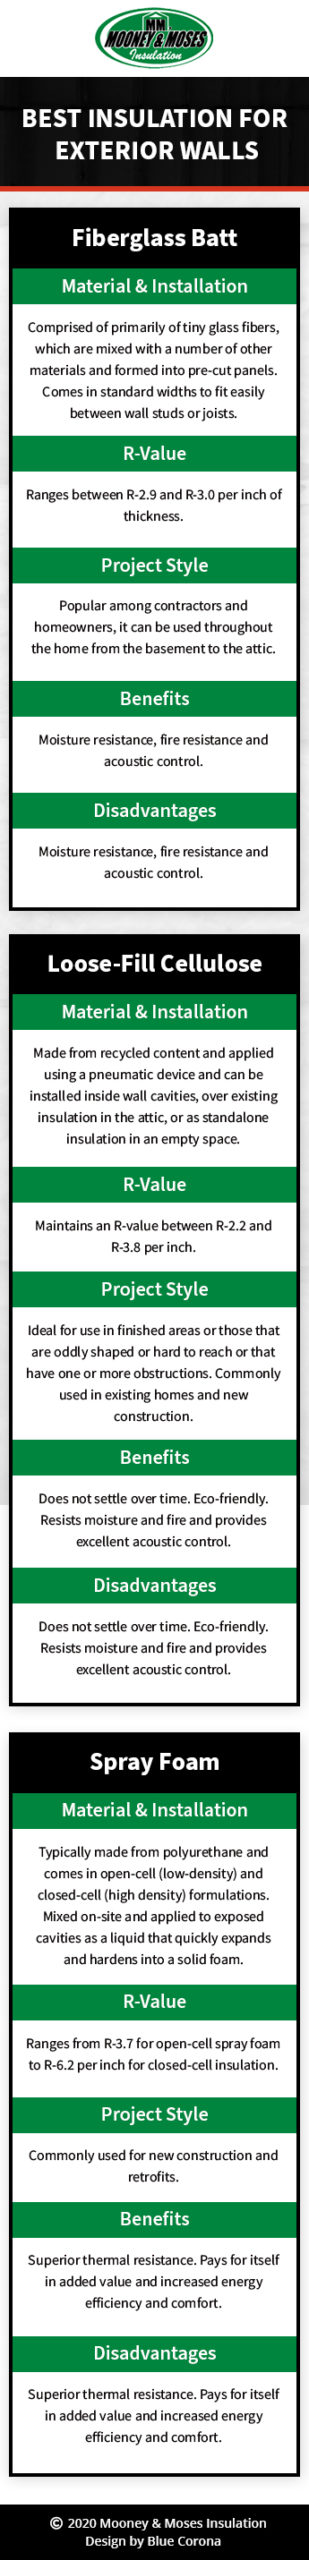 Infographic explaining best insulation for exterior walls.